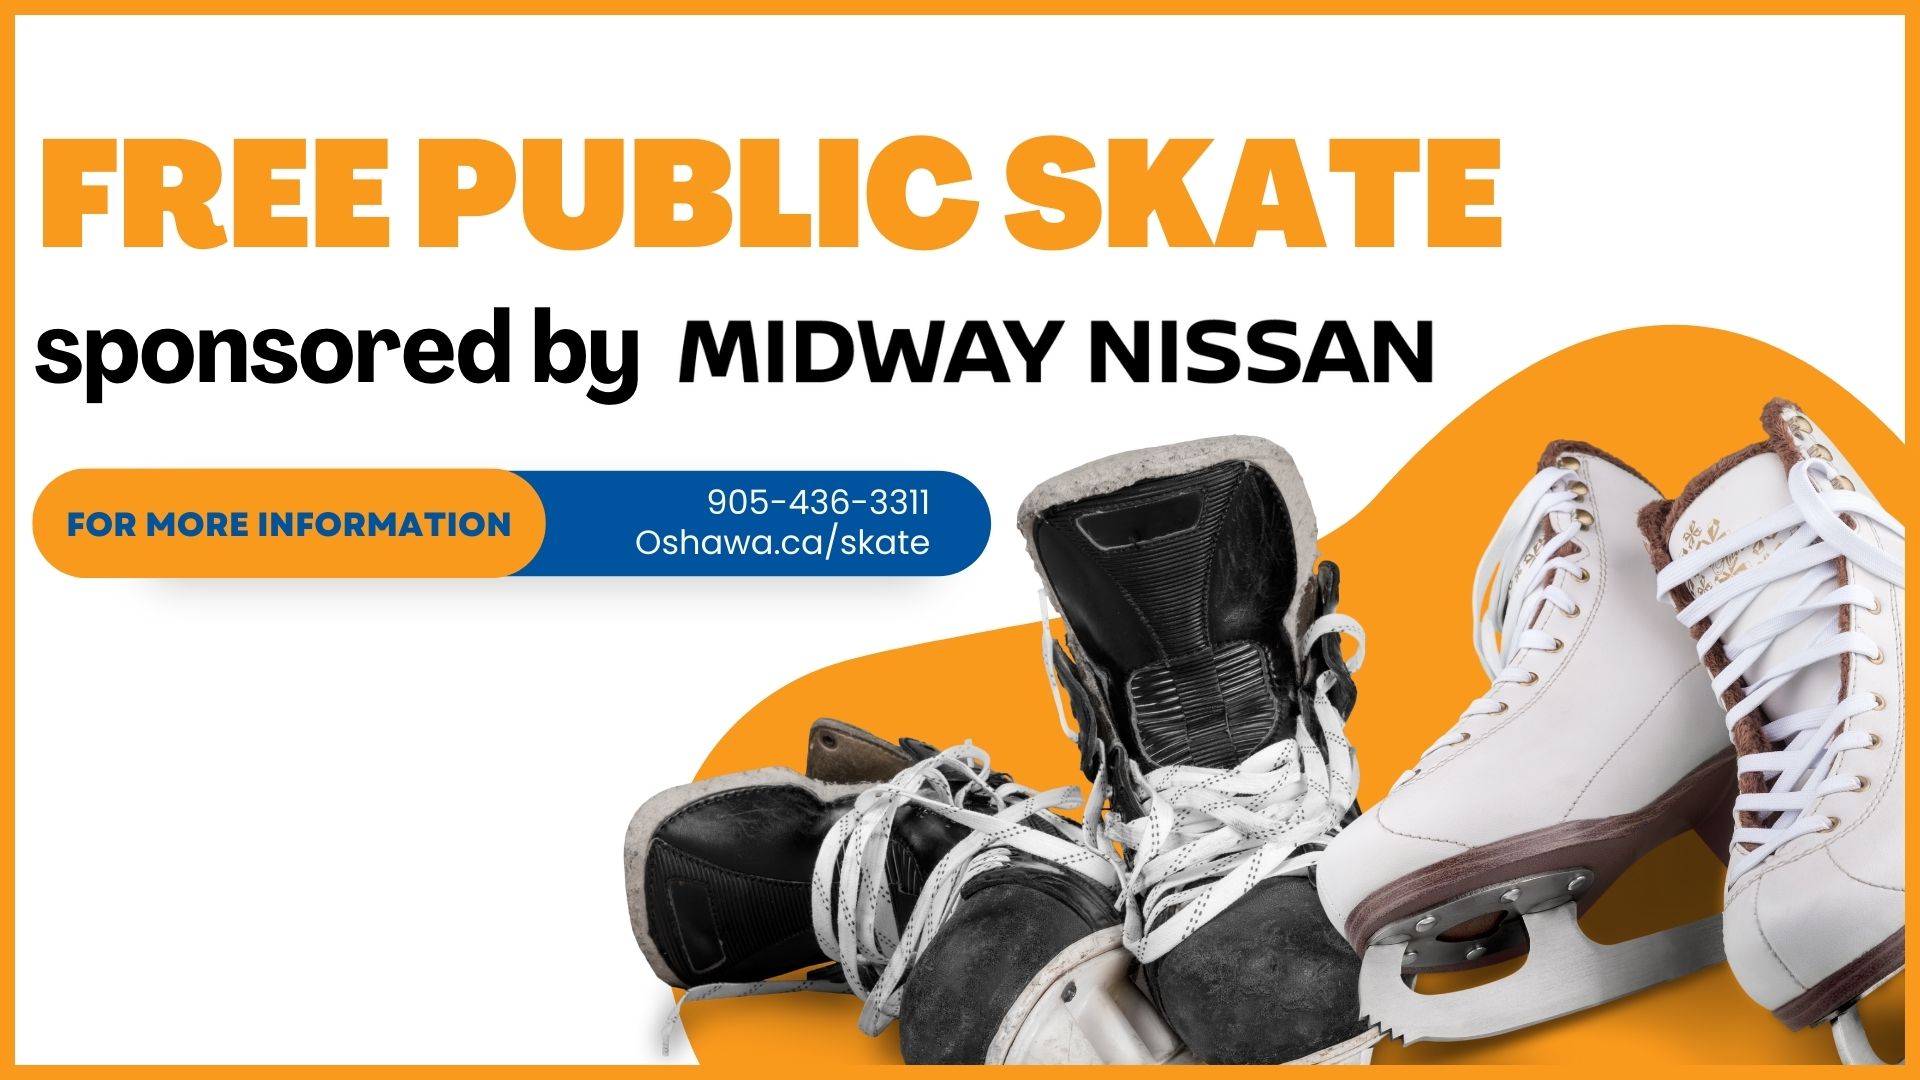 Free Public Skate sponsored by Midway Nissan